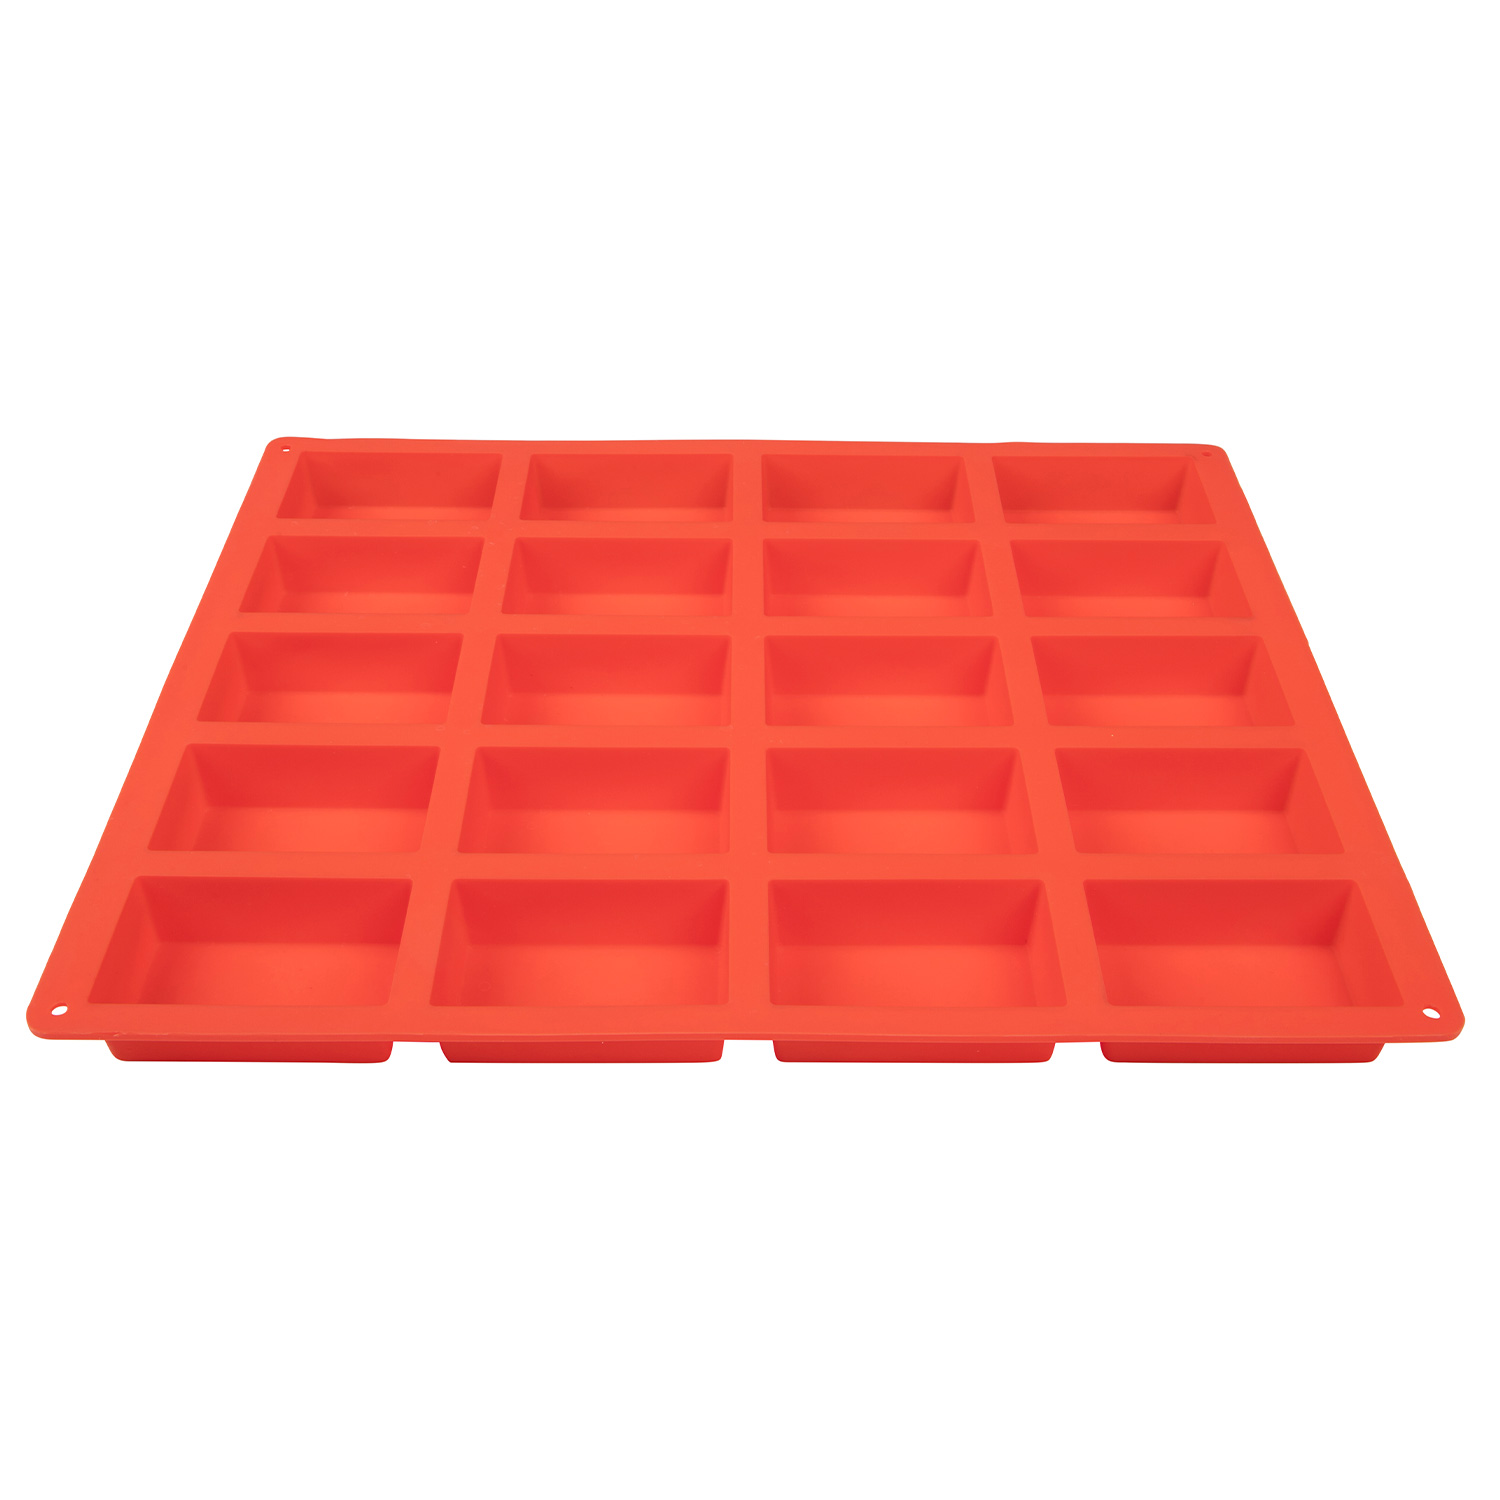 Red Silicone Pop-Out Ice Cube Tray, 2-Pack